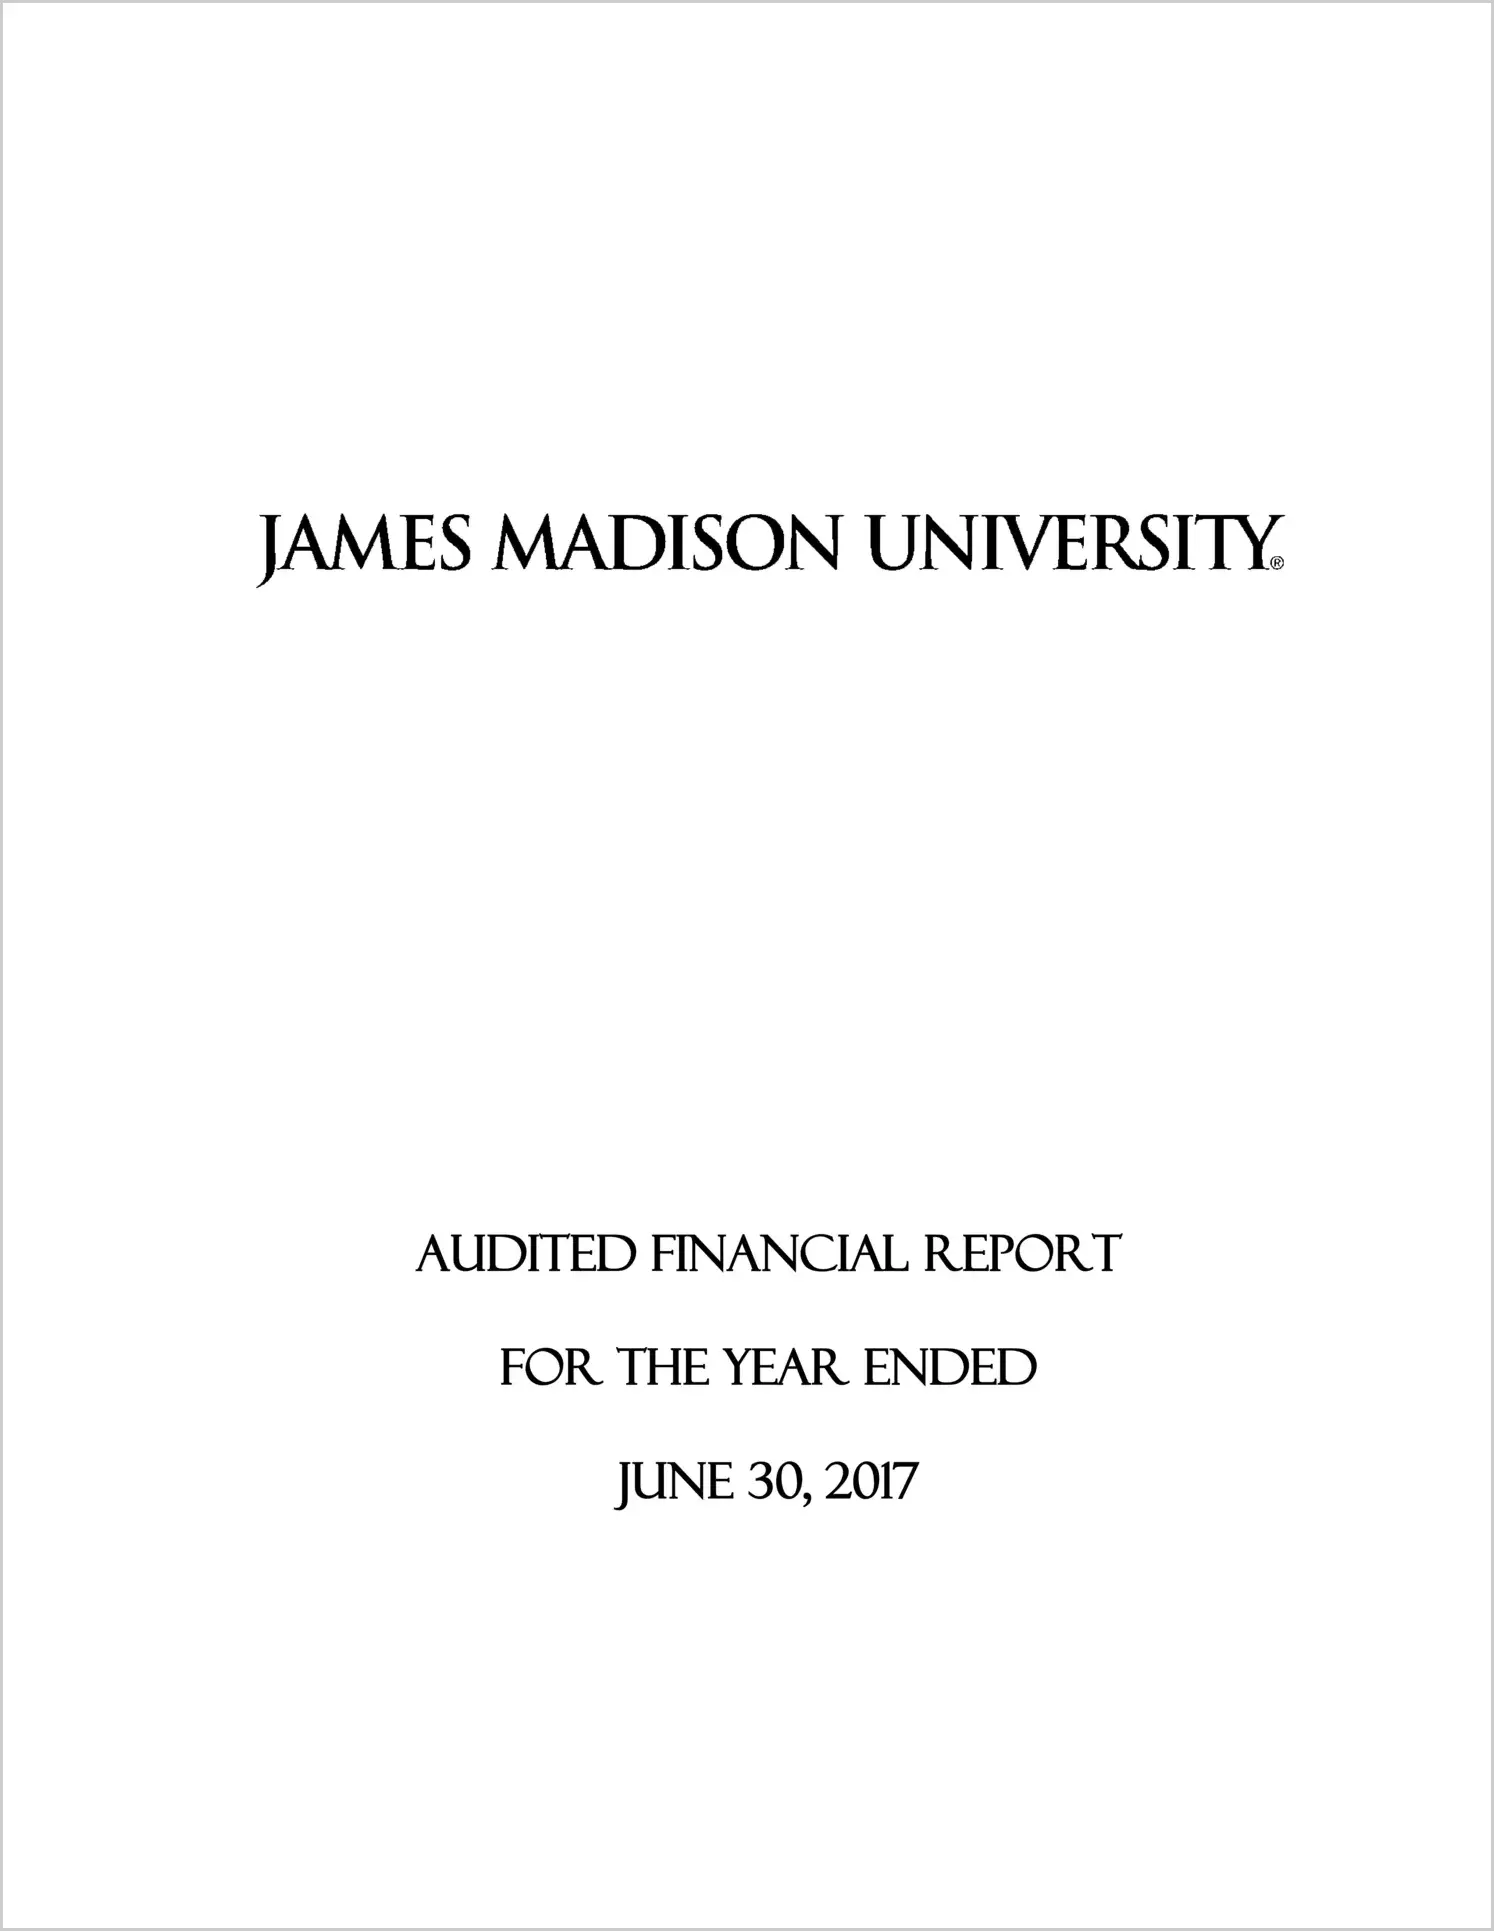 James Madison University Financial Statements for the year ended June 30, 2017